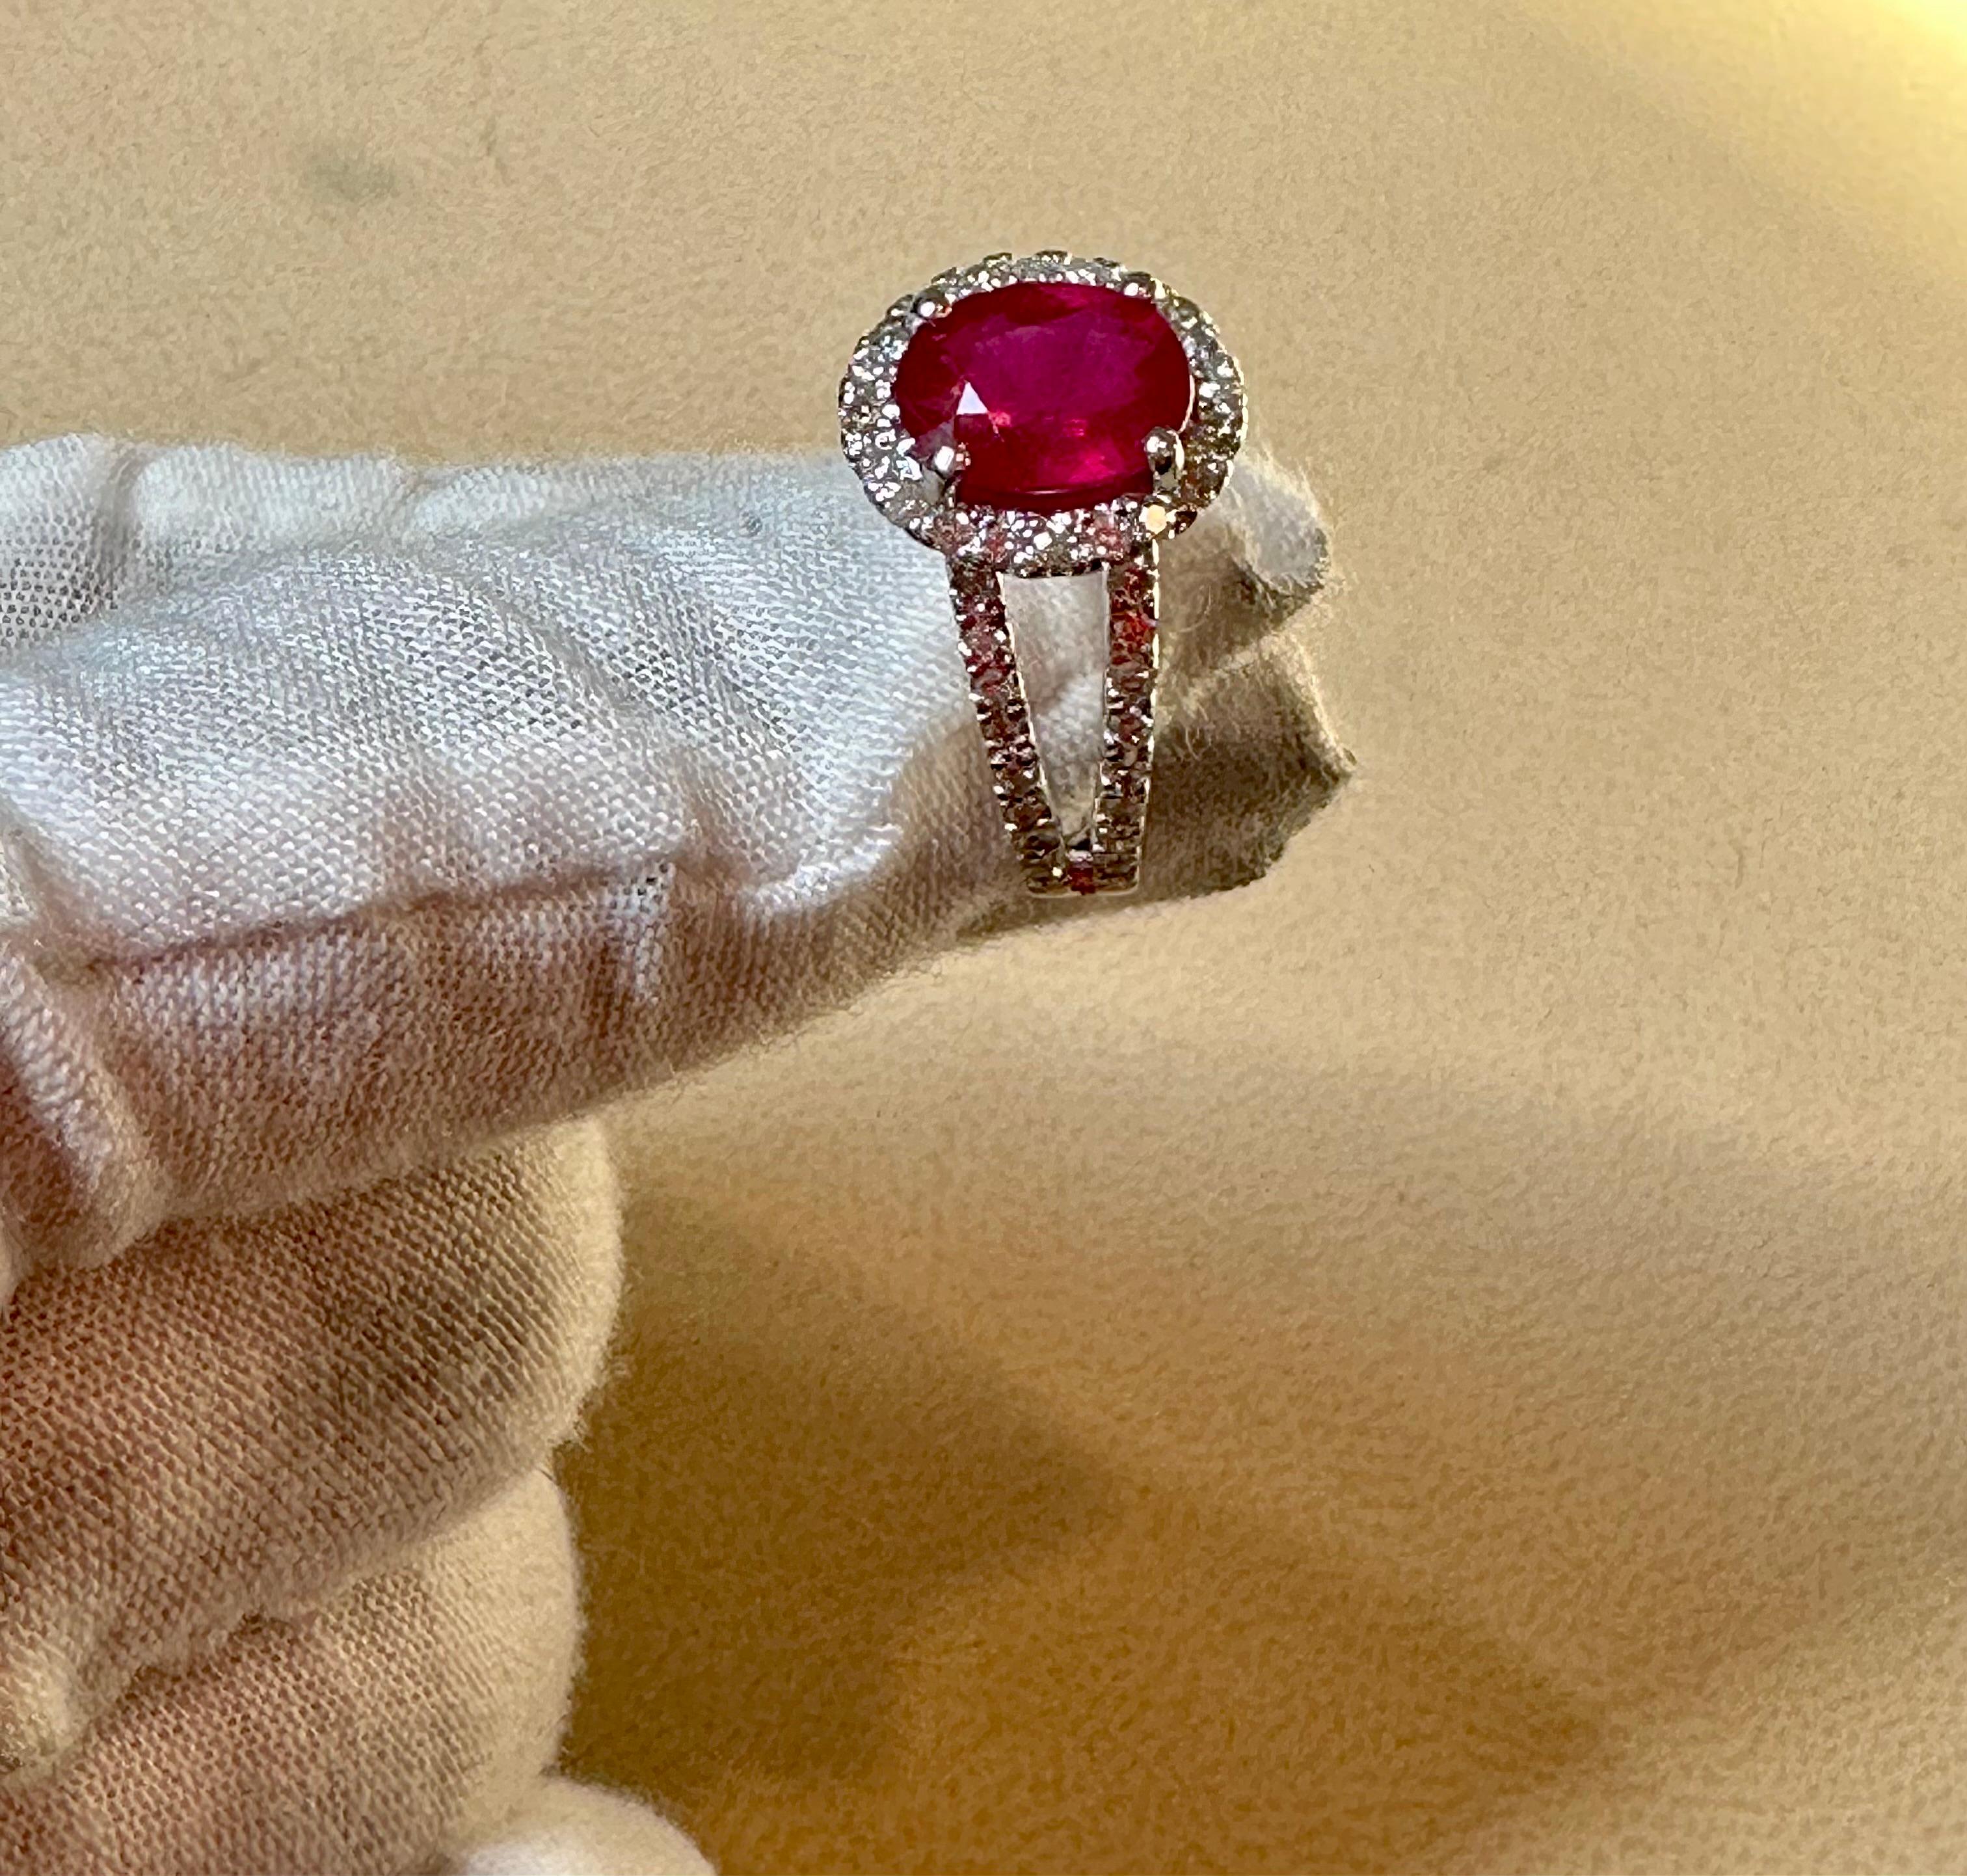 2.5 Carat Oval Treated Ruby & 2 ct Diamond Ring 14 Karat White Gold Size 7 For Sale 2